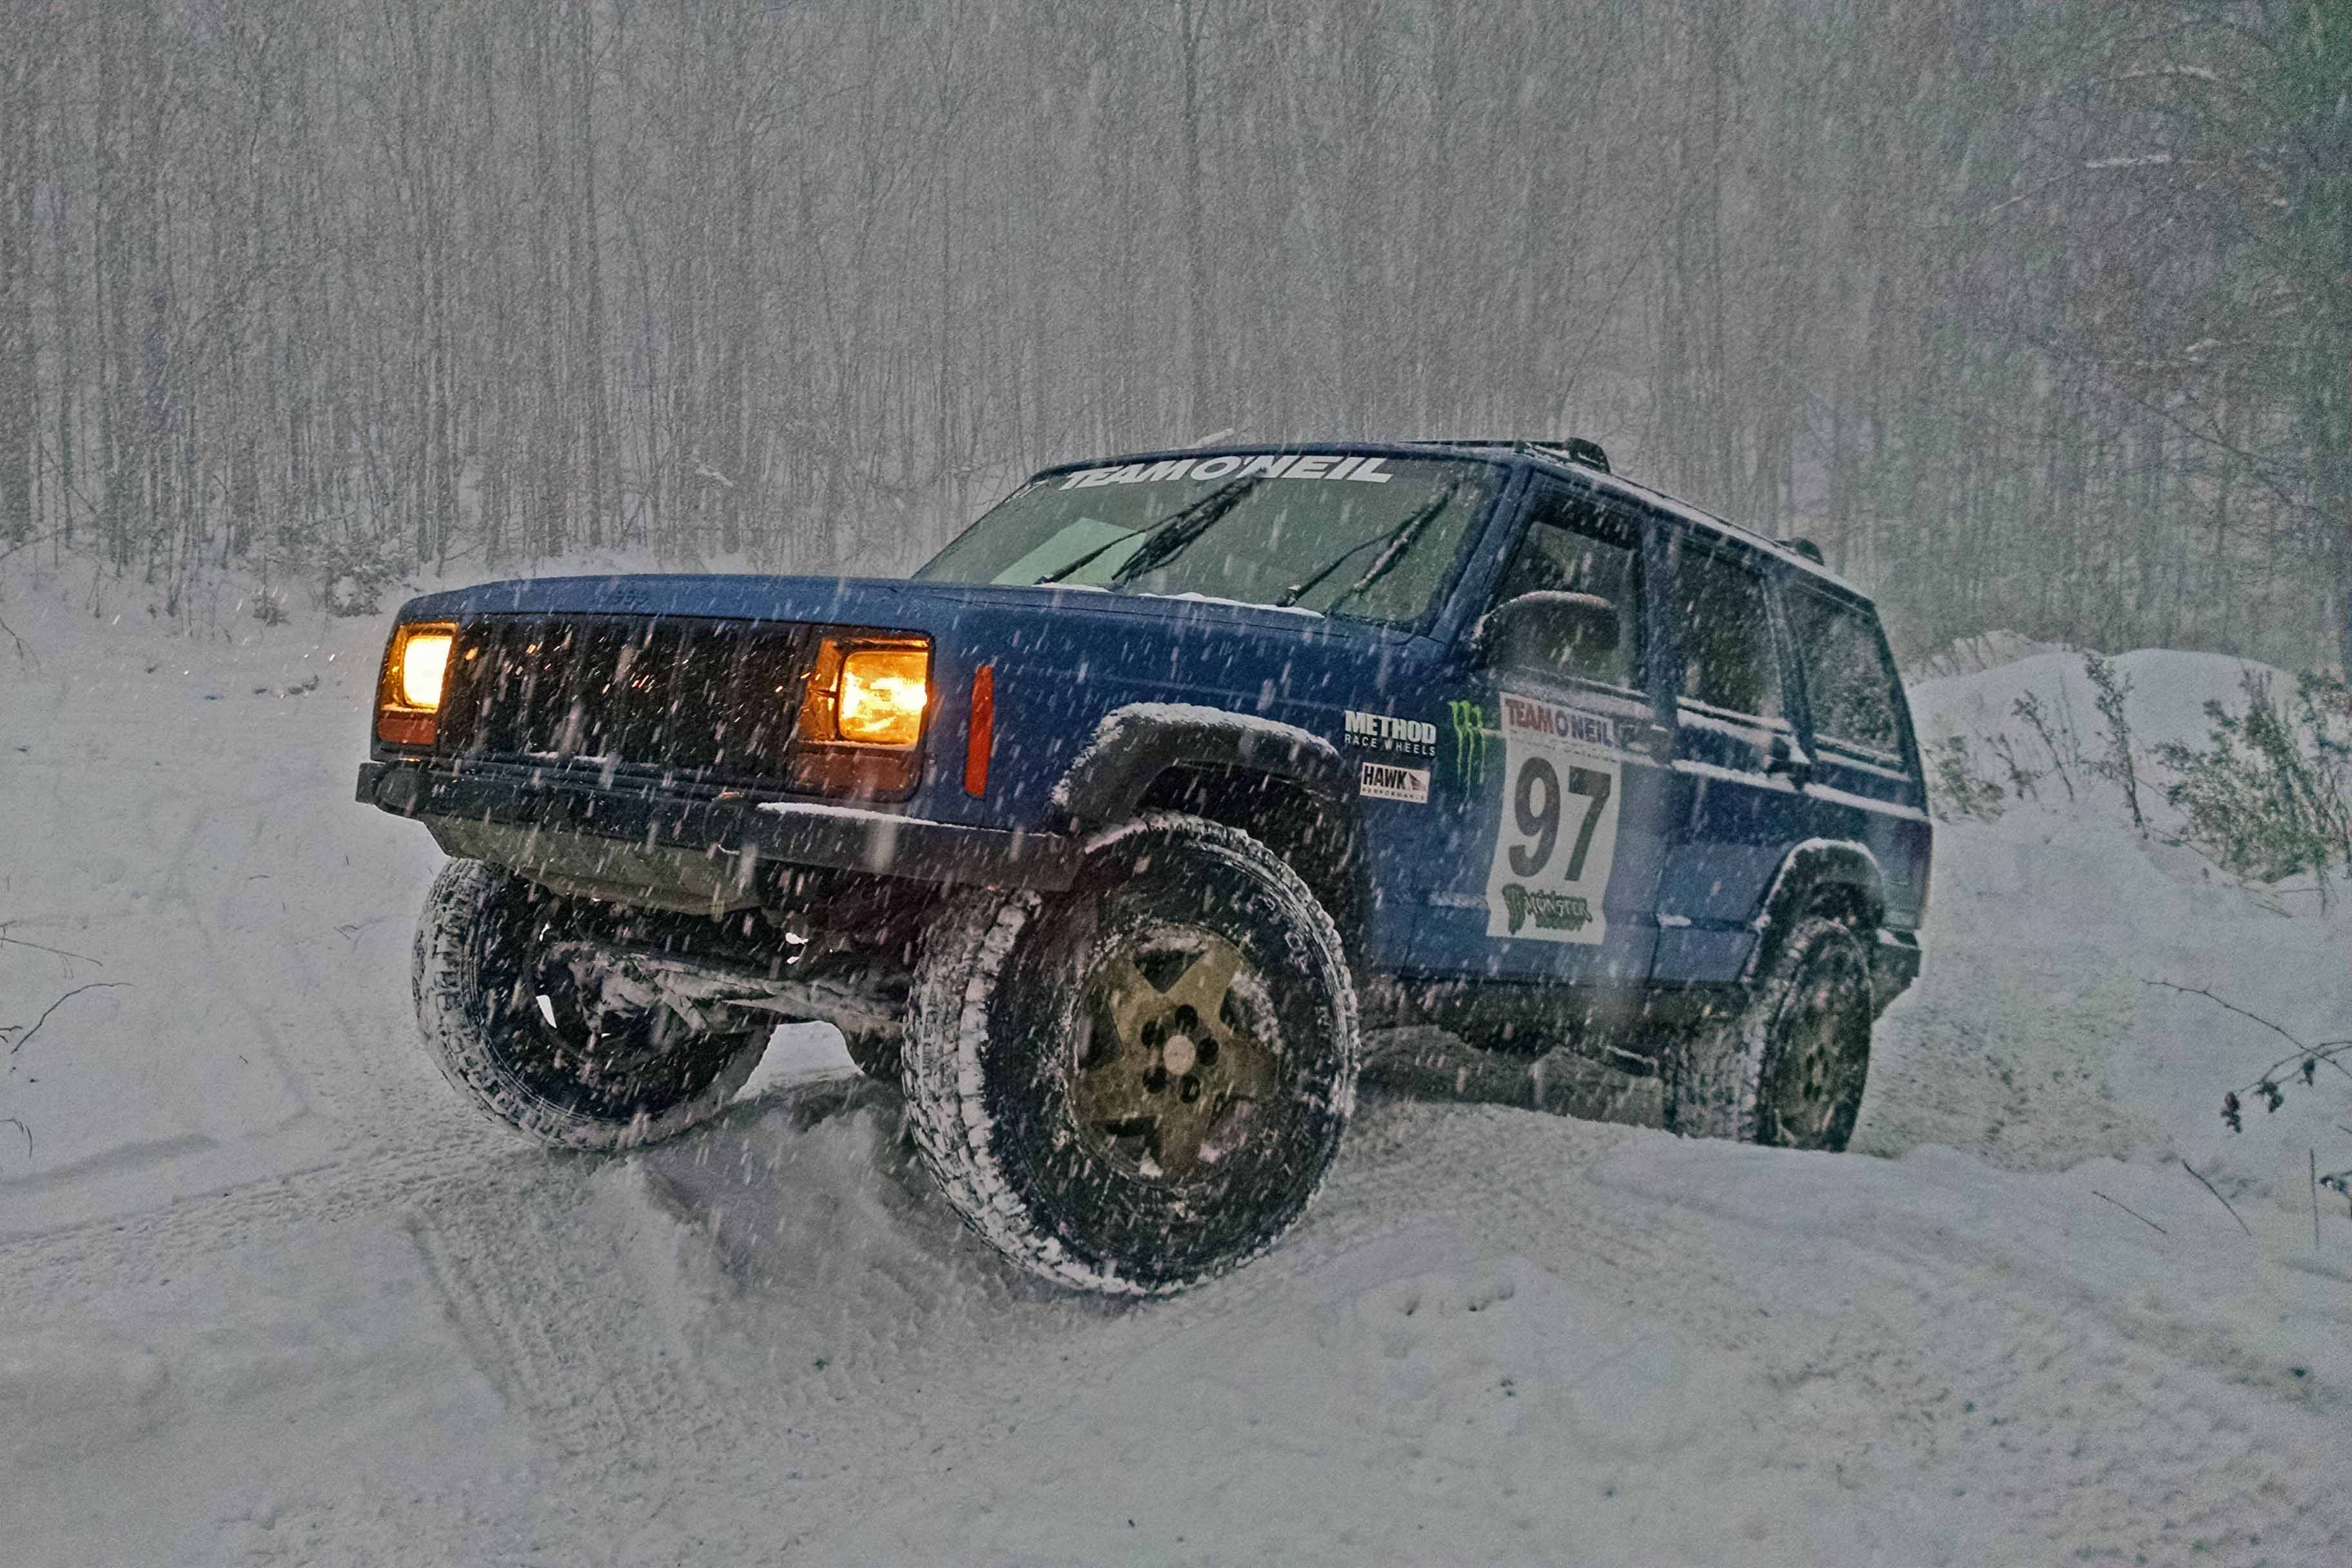 Jeep Cherokee climbing a steep, off-road hill in winter weather